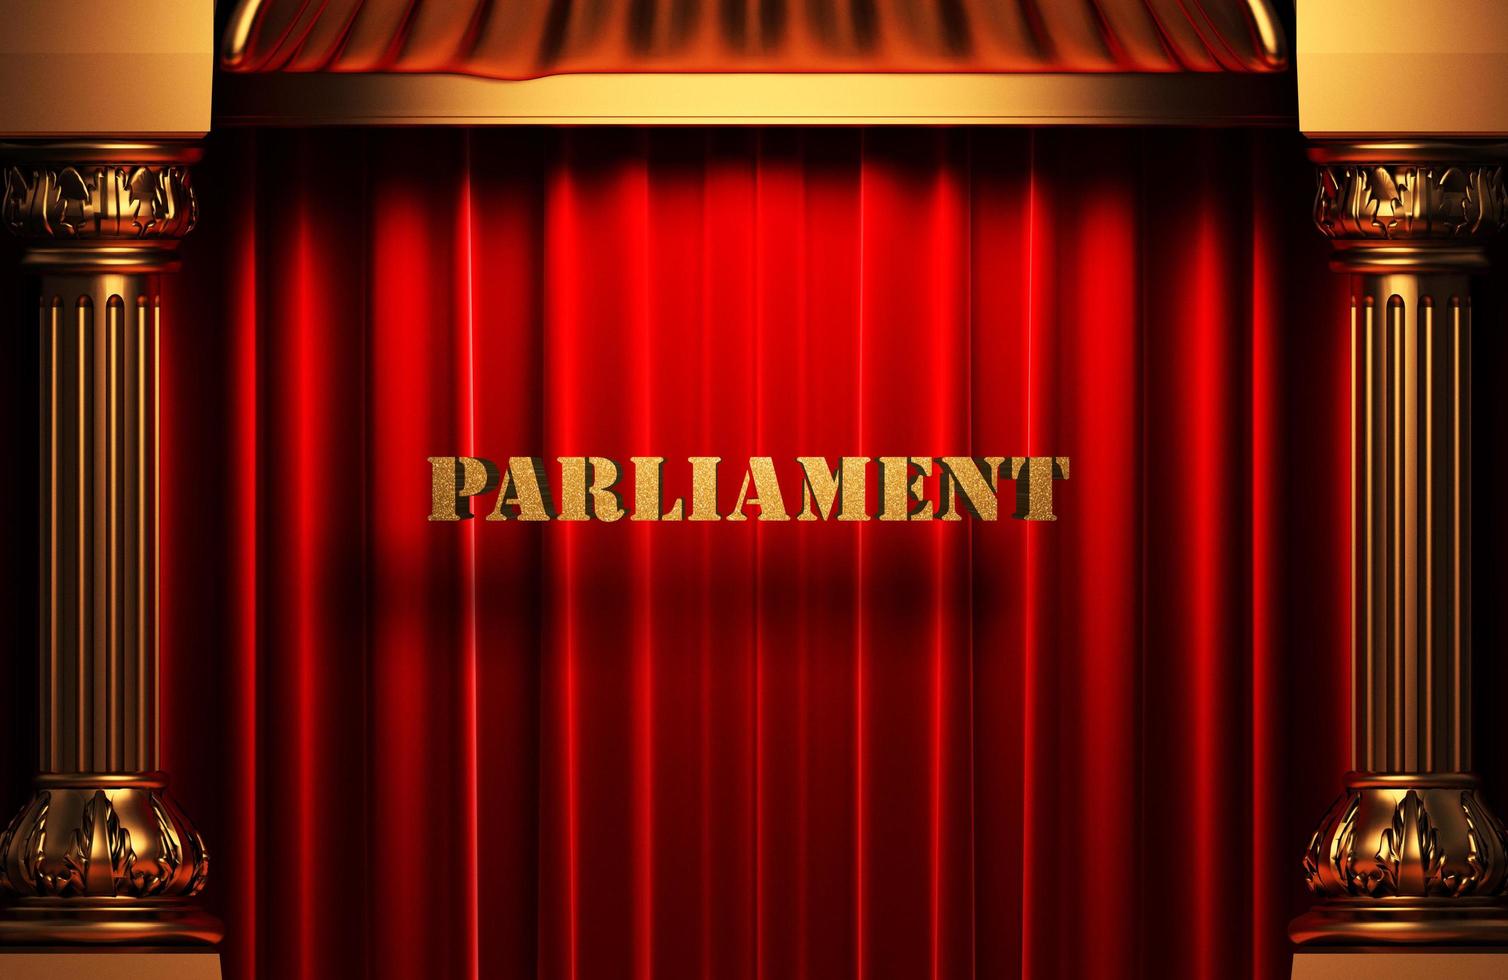 parliament golden word on red curtain photo